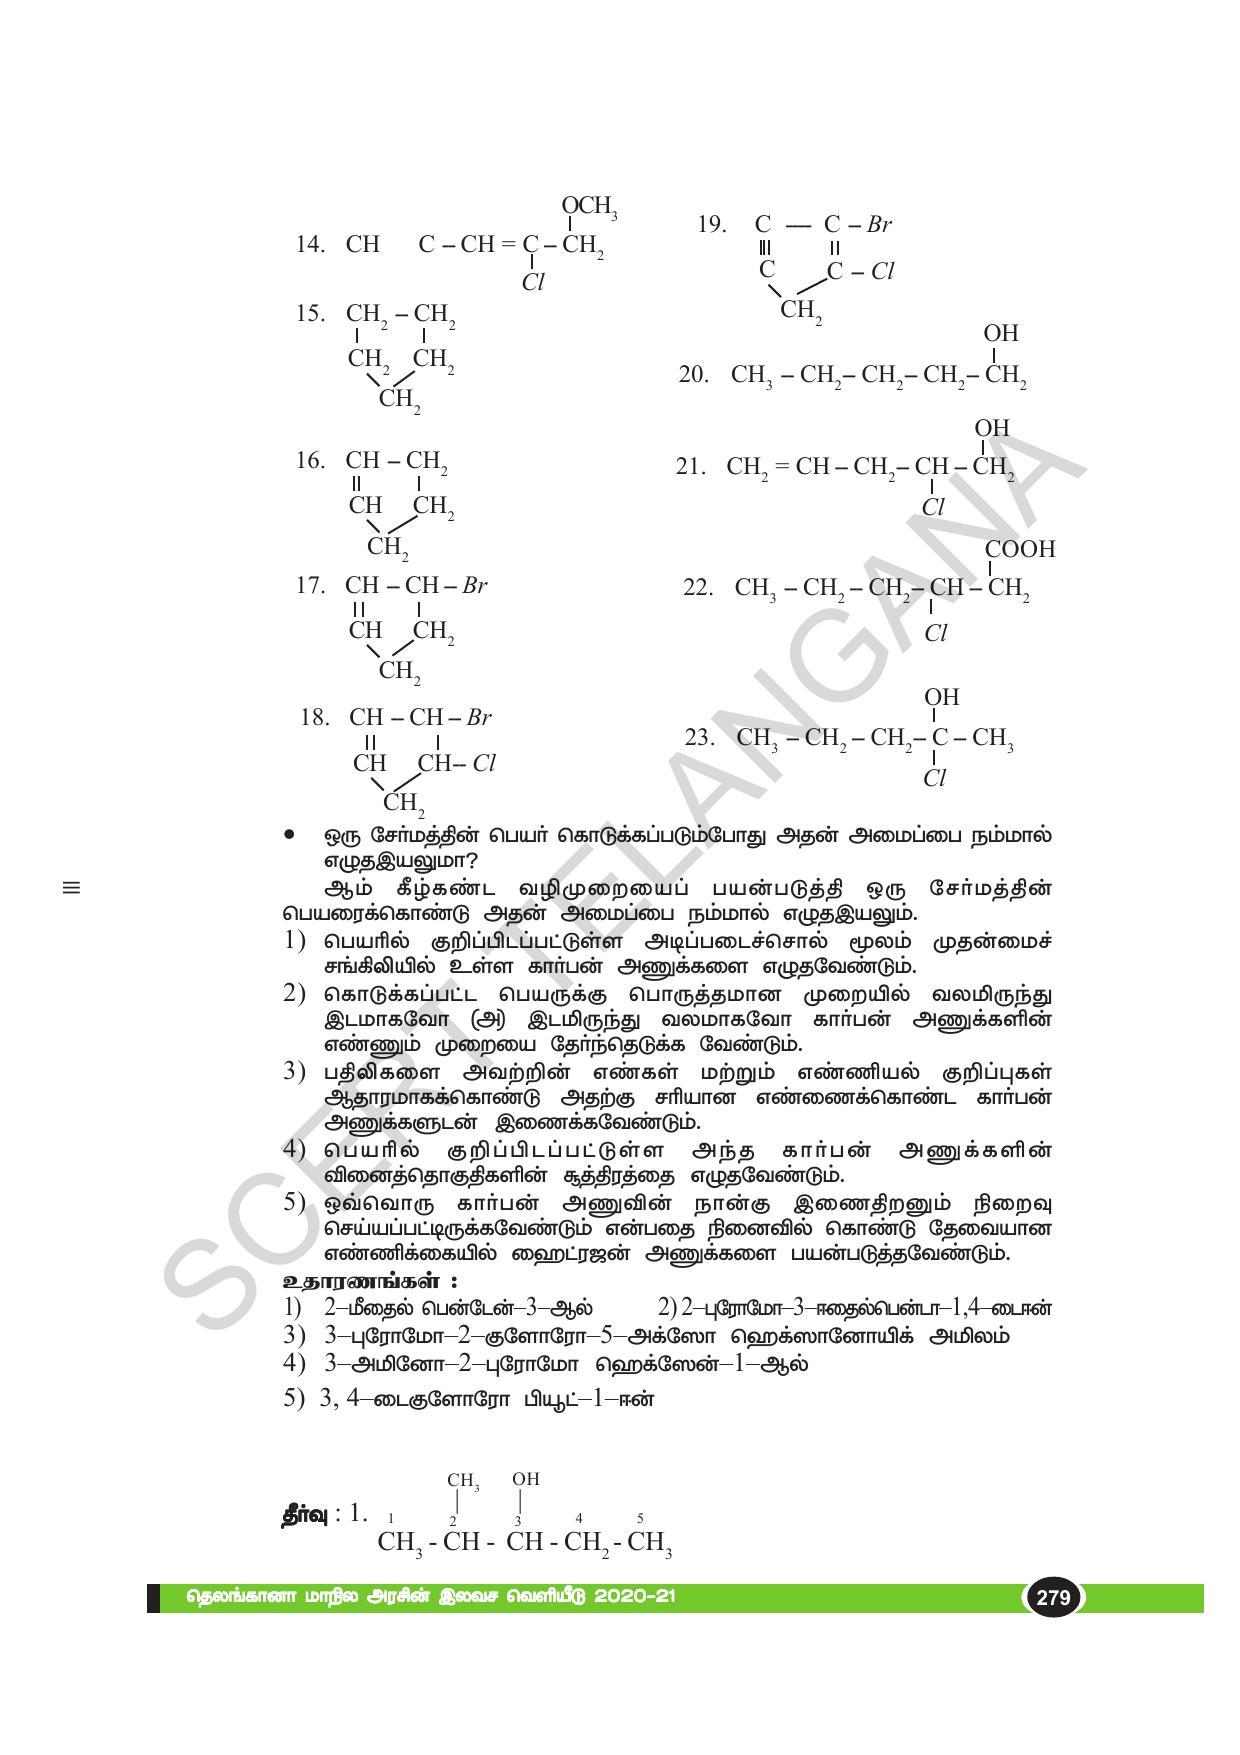 TS SCERT Class 10 Physical Science(Tamil Medium) Text Book - Page 291